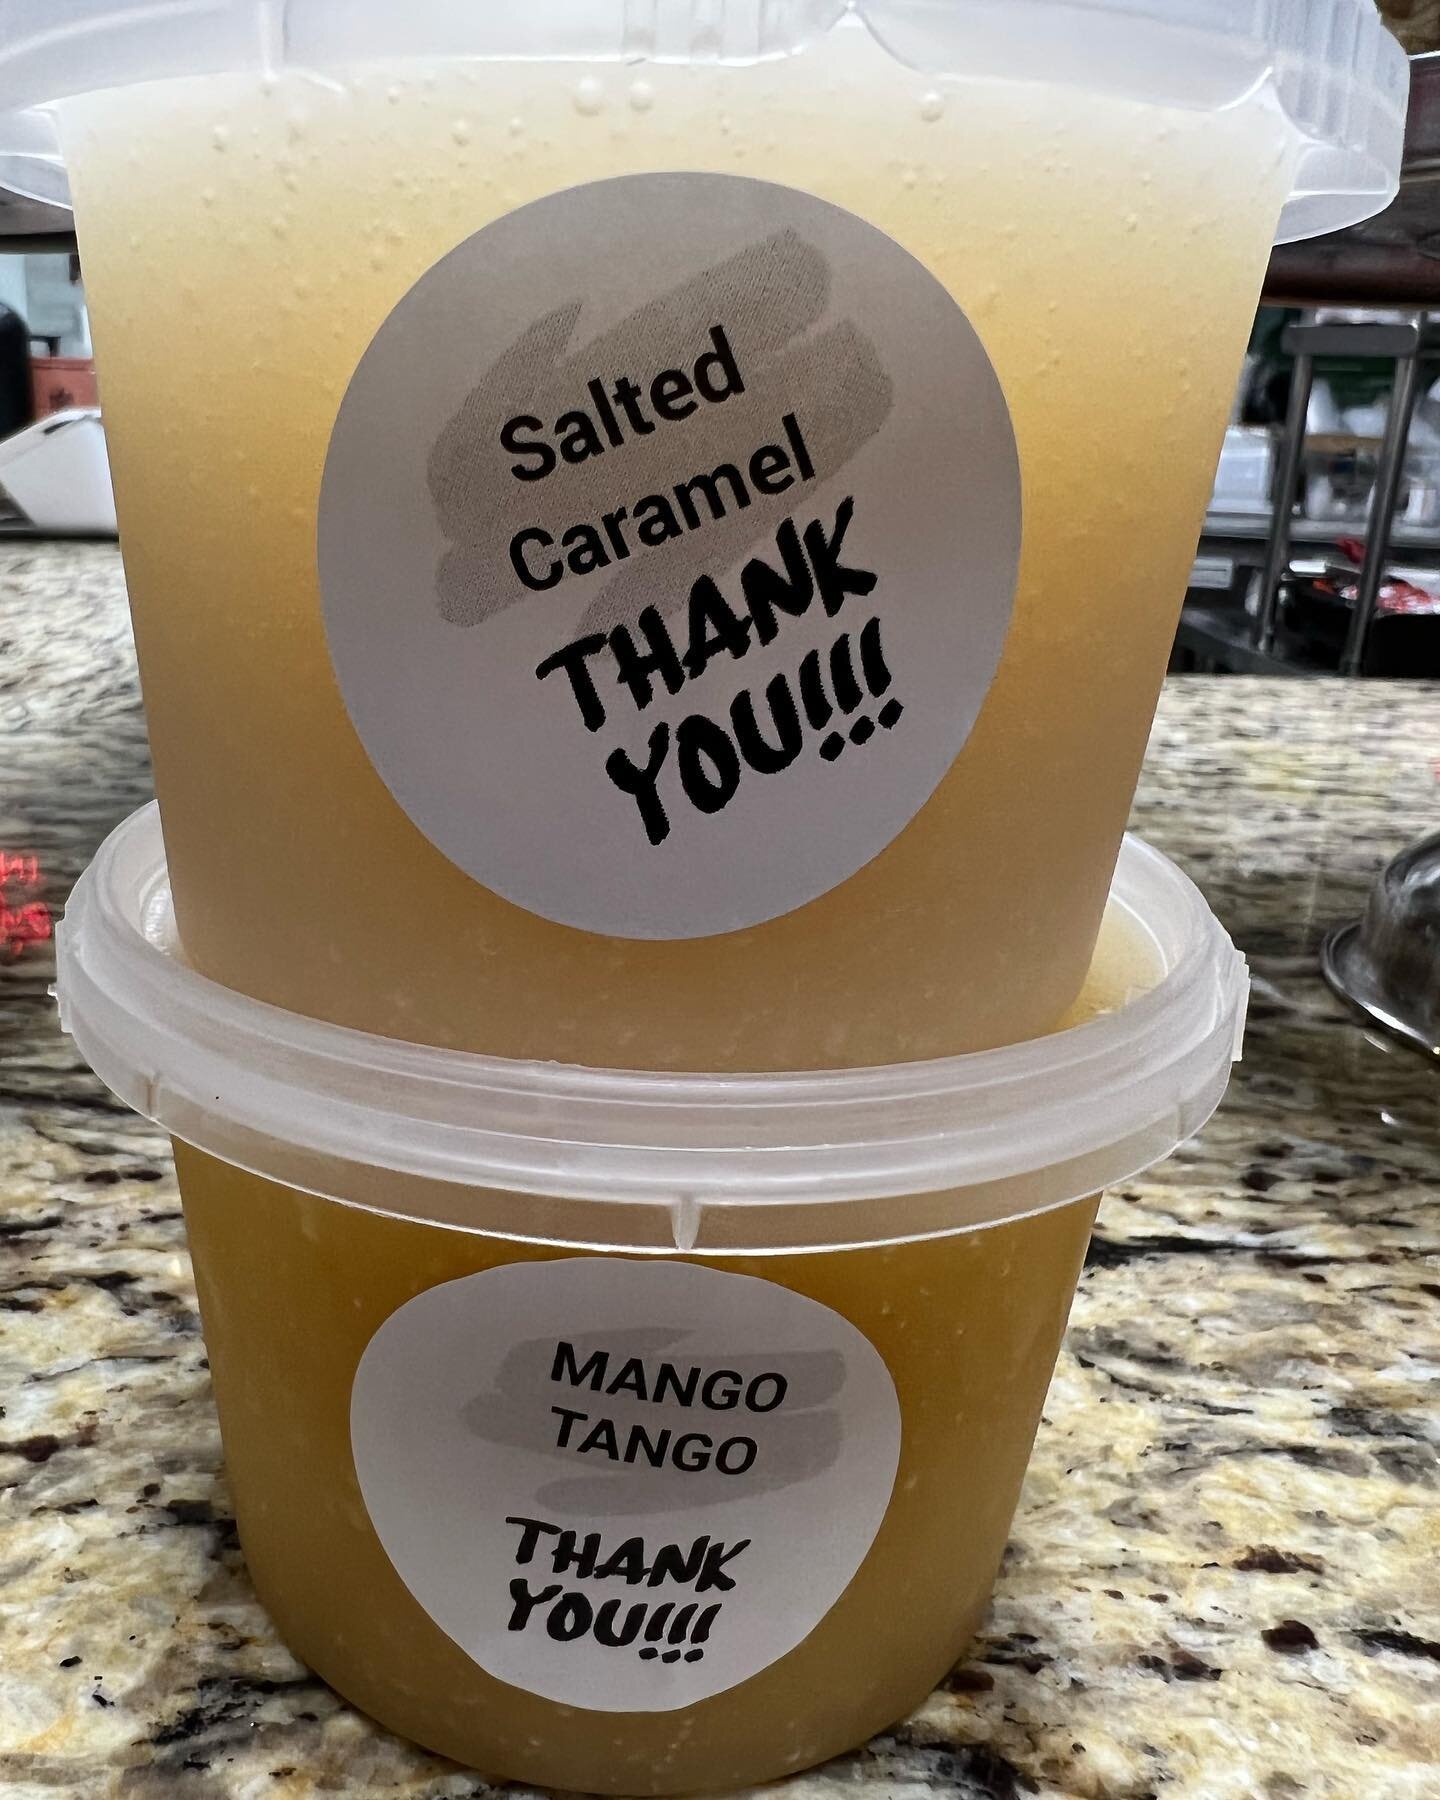 We are now carrying Sea Moss.  Come in and ask about it. 
Currently in Stock:
Salted Caramel 
Mango Tango 
$15 each